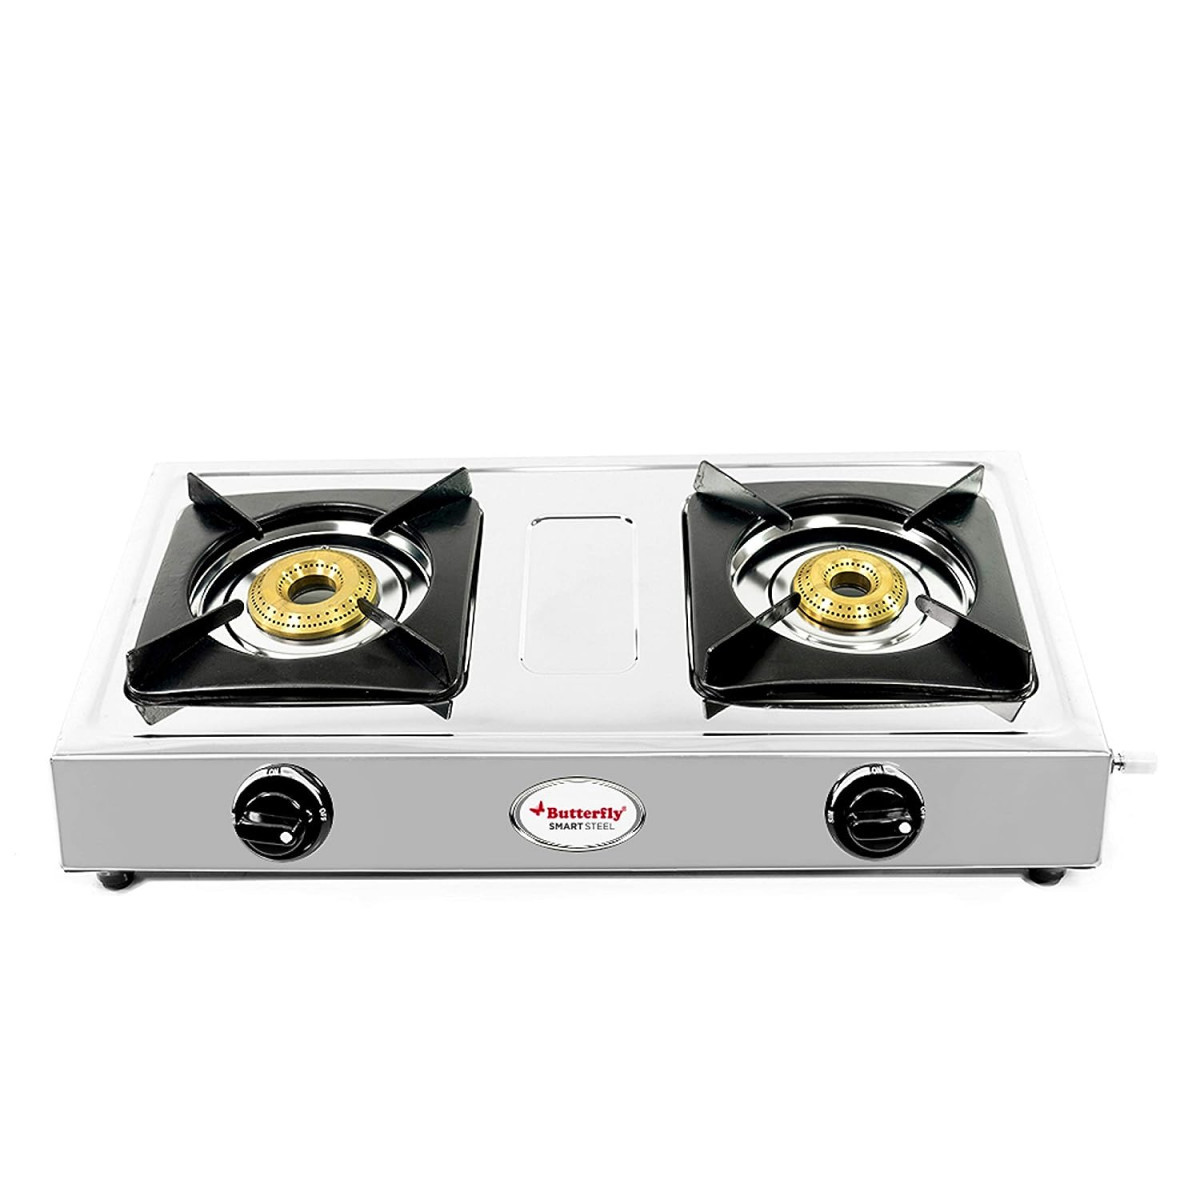 Butterfly Smart Stainless Steel 2 Burner Gas Stove Manual Ignition Sliver